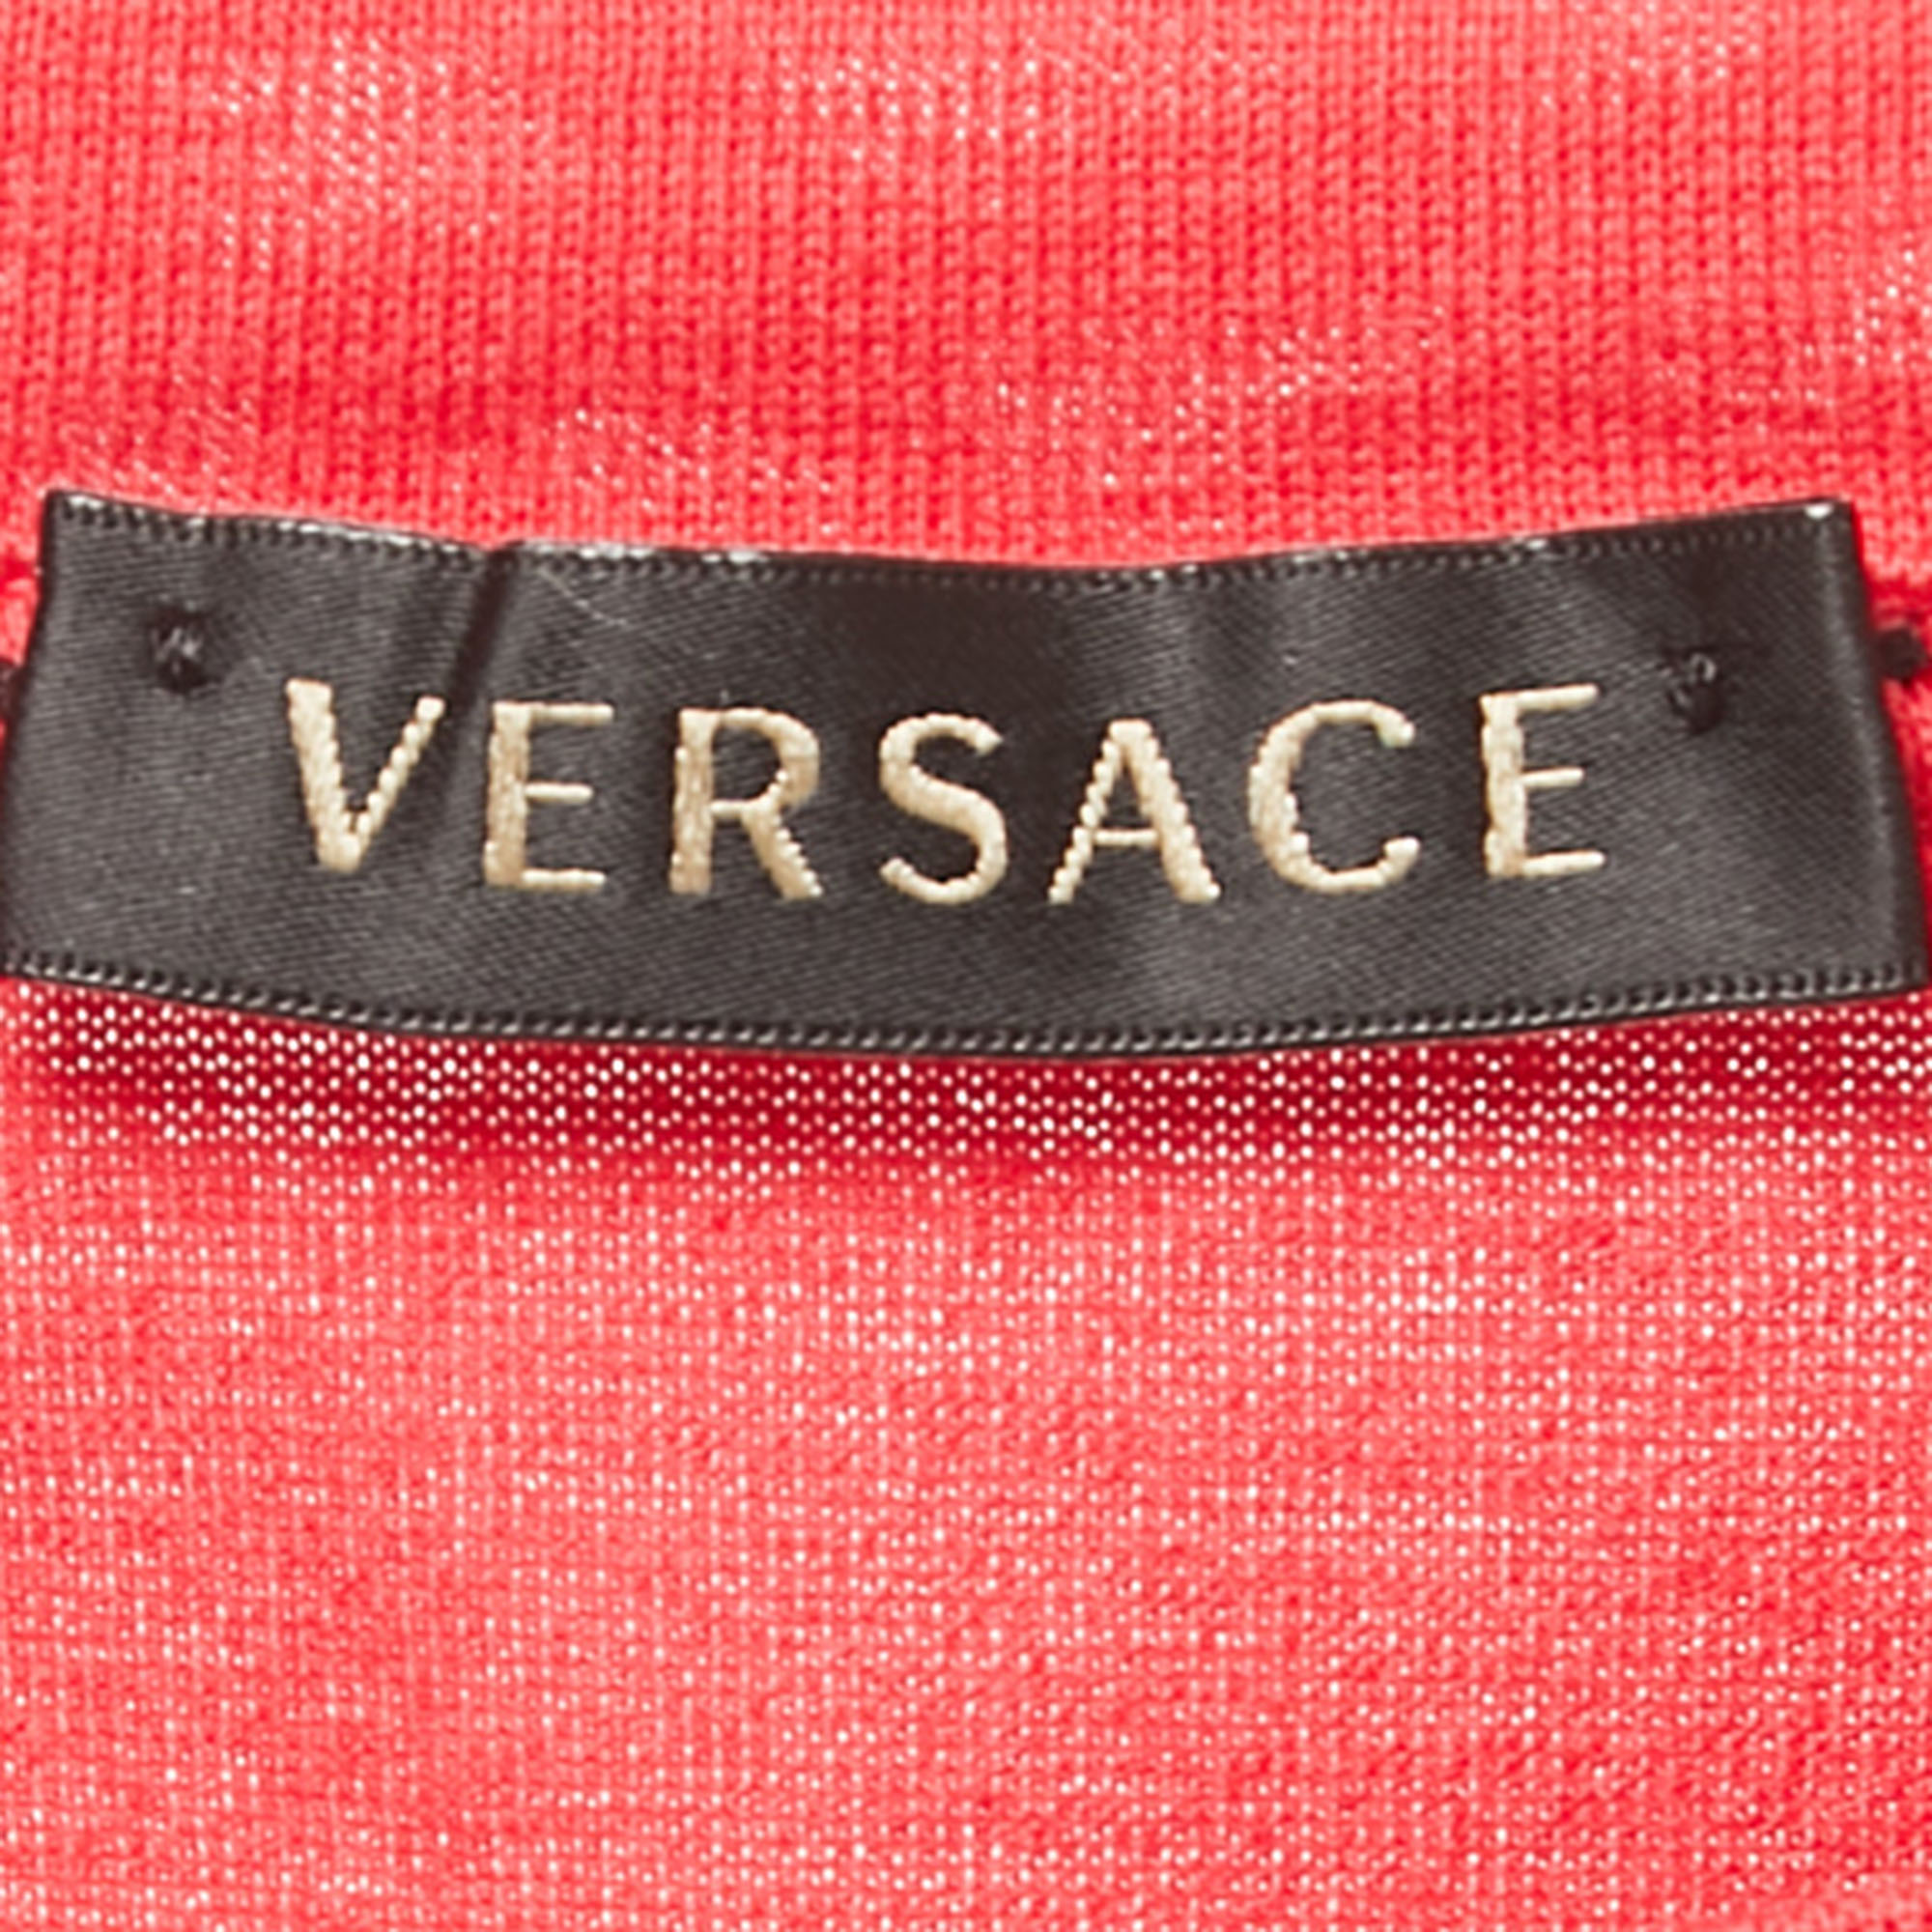 Versace Red Logo Embroidered Cotton Half Sleeve T-Shirt S